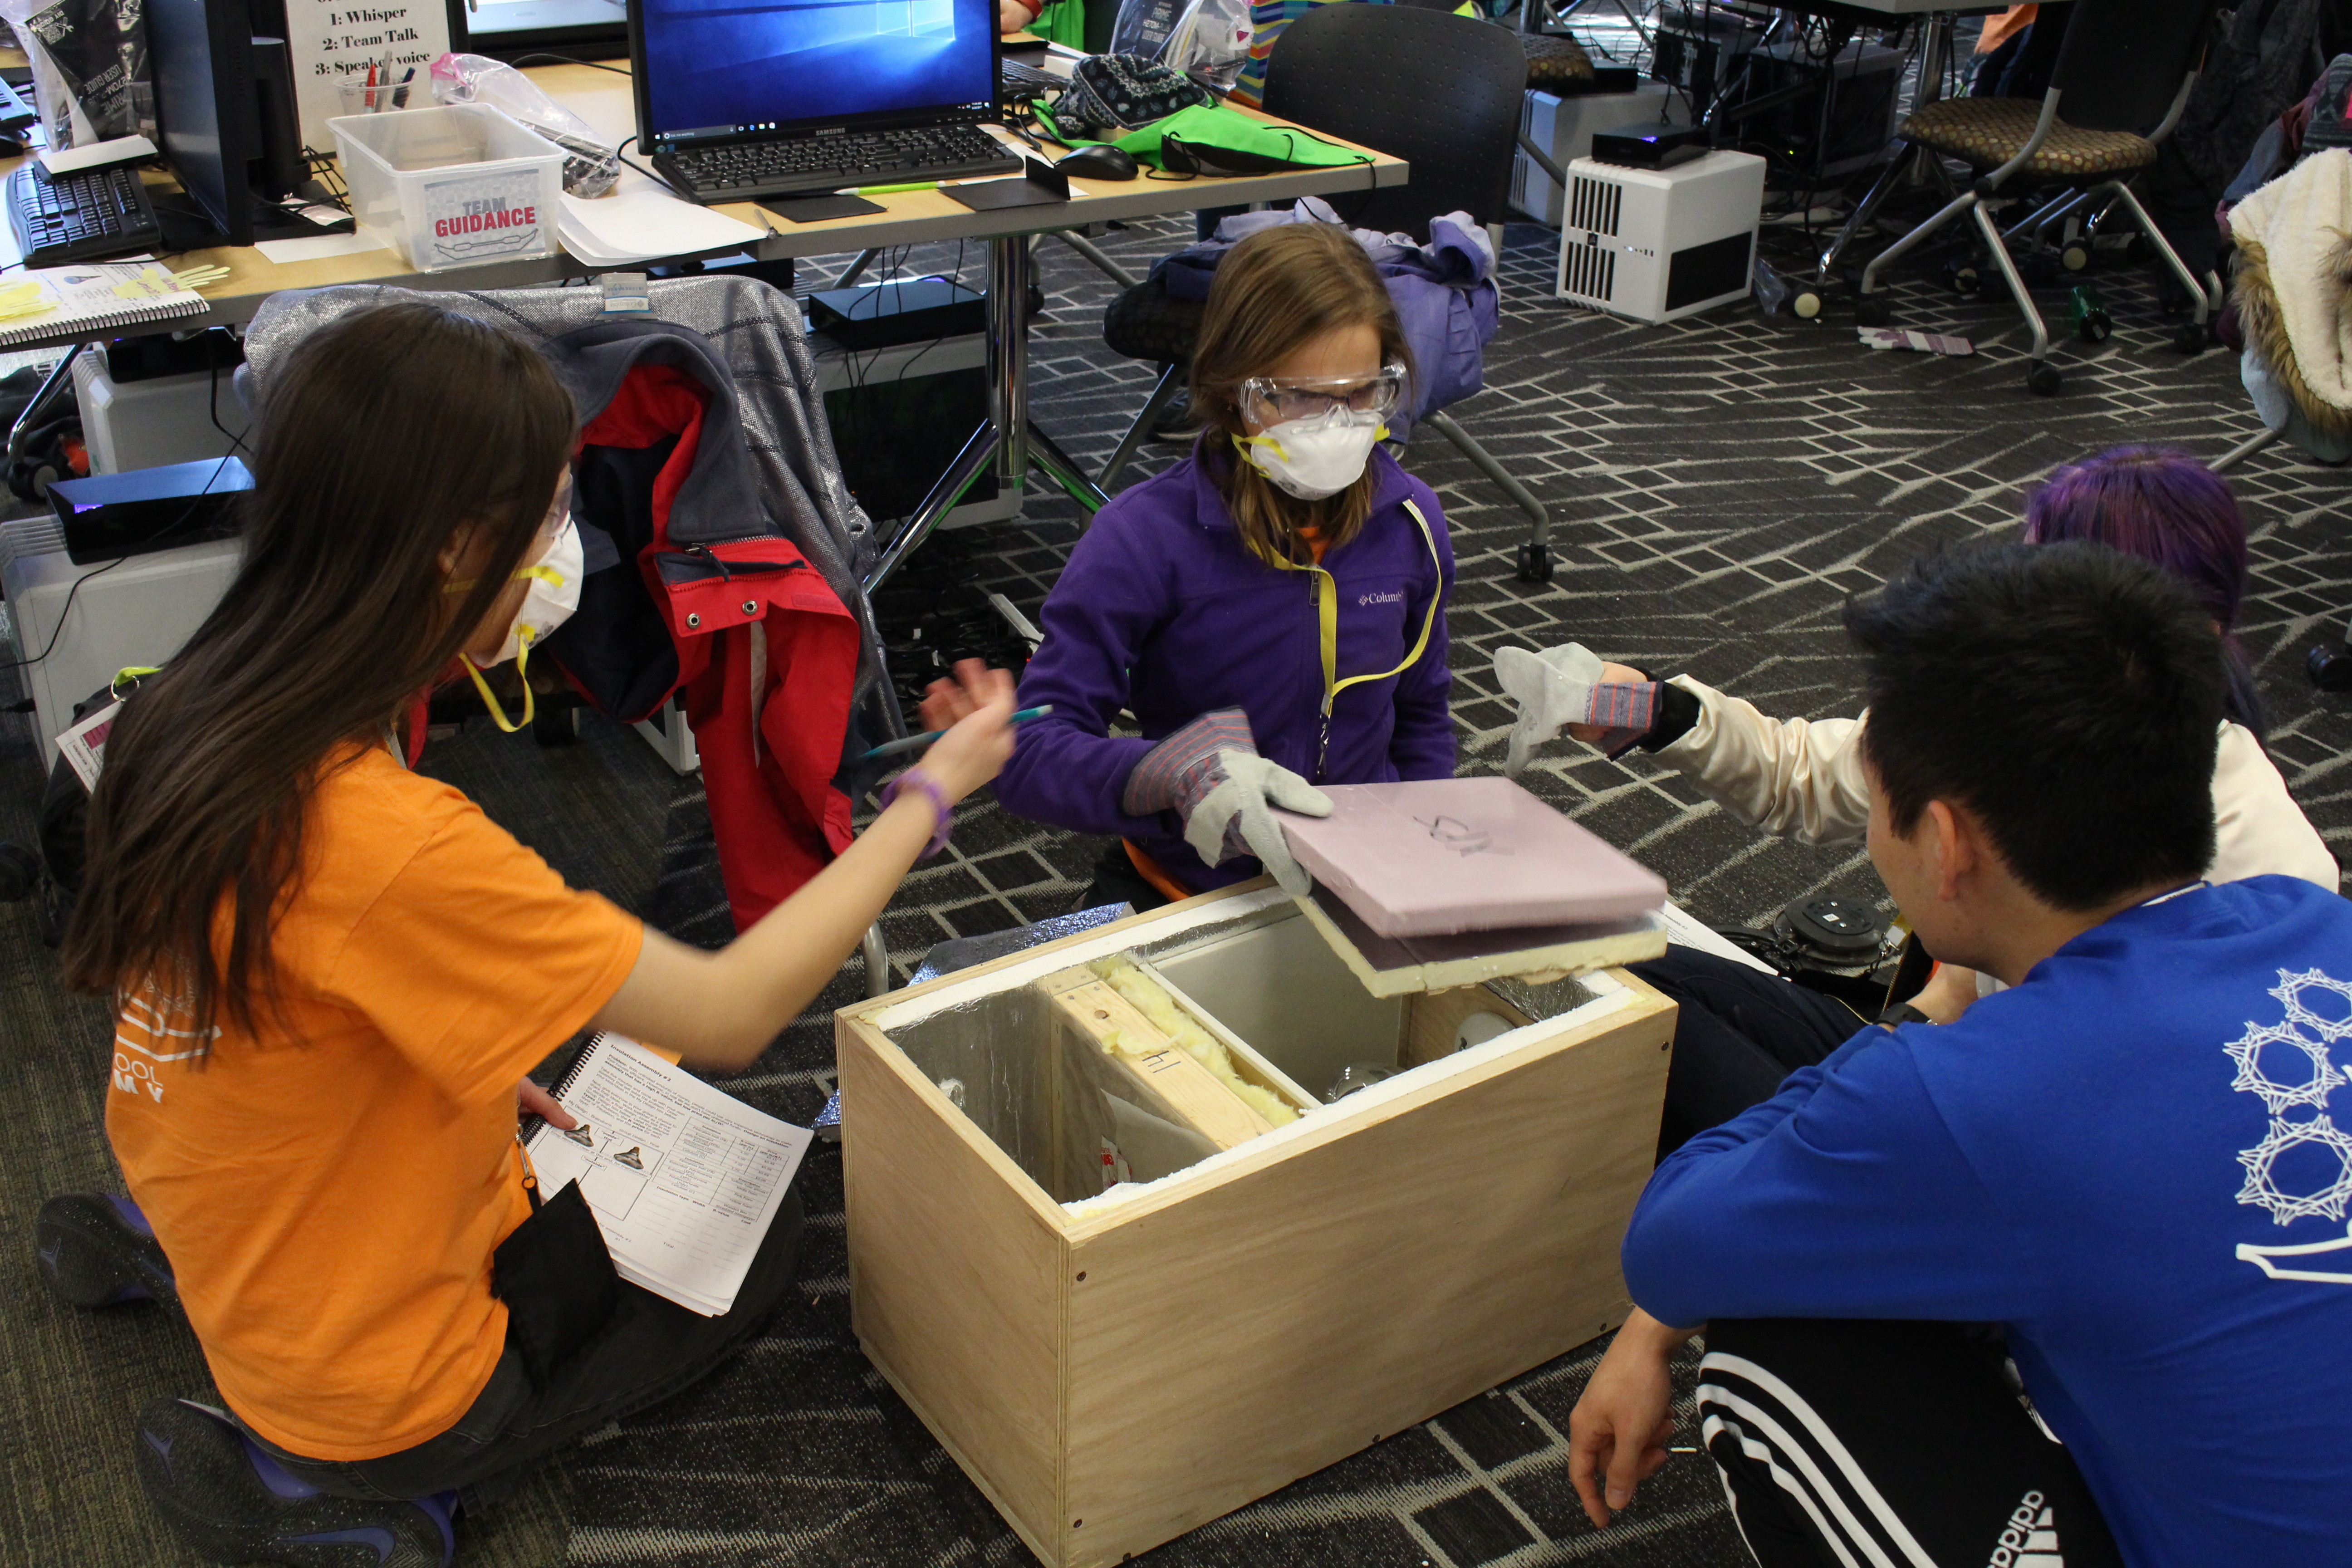 SStudents work on a box